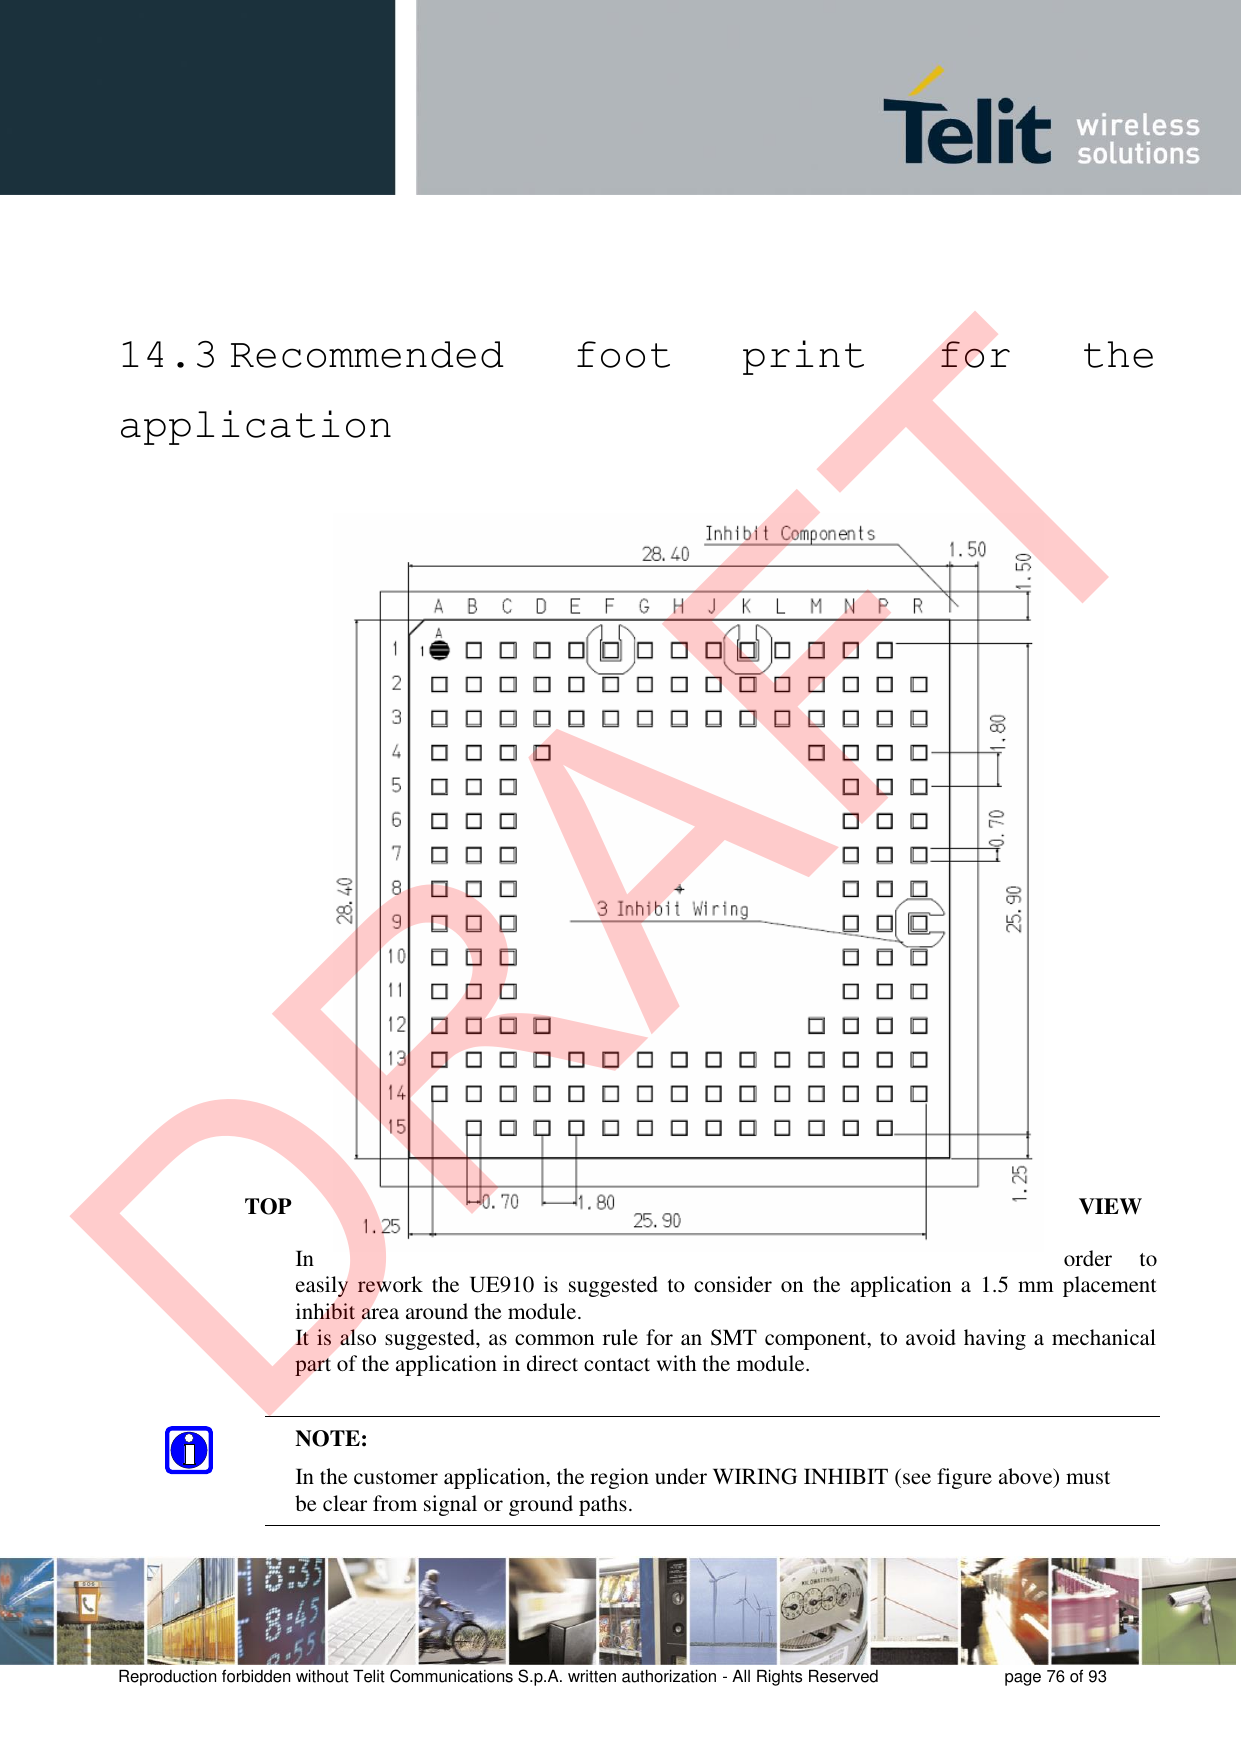 Reproduction forbidden without Telit Communications S.p.A. written authorization - All Rights Reserved  page 76 of 93 14.3 Recommended  foot  print  for  the application TOP  VIEW In  order  to easily rework the  UE910 is  suggested to consider on the  application a  1.5 mm placement inhibit area around the module. It is also suggested, as common rule for an SMT component, to avoid having a mechanical part of the application in direct contact with the module. NOTE: In the customer application, the region under WIRING INHIBIT (see figure above) must be clear from signal or ground paths.  DRAFT